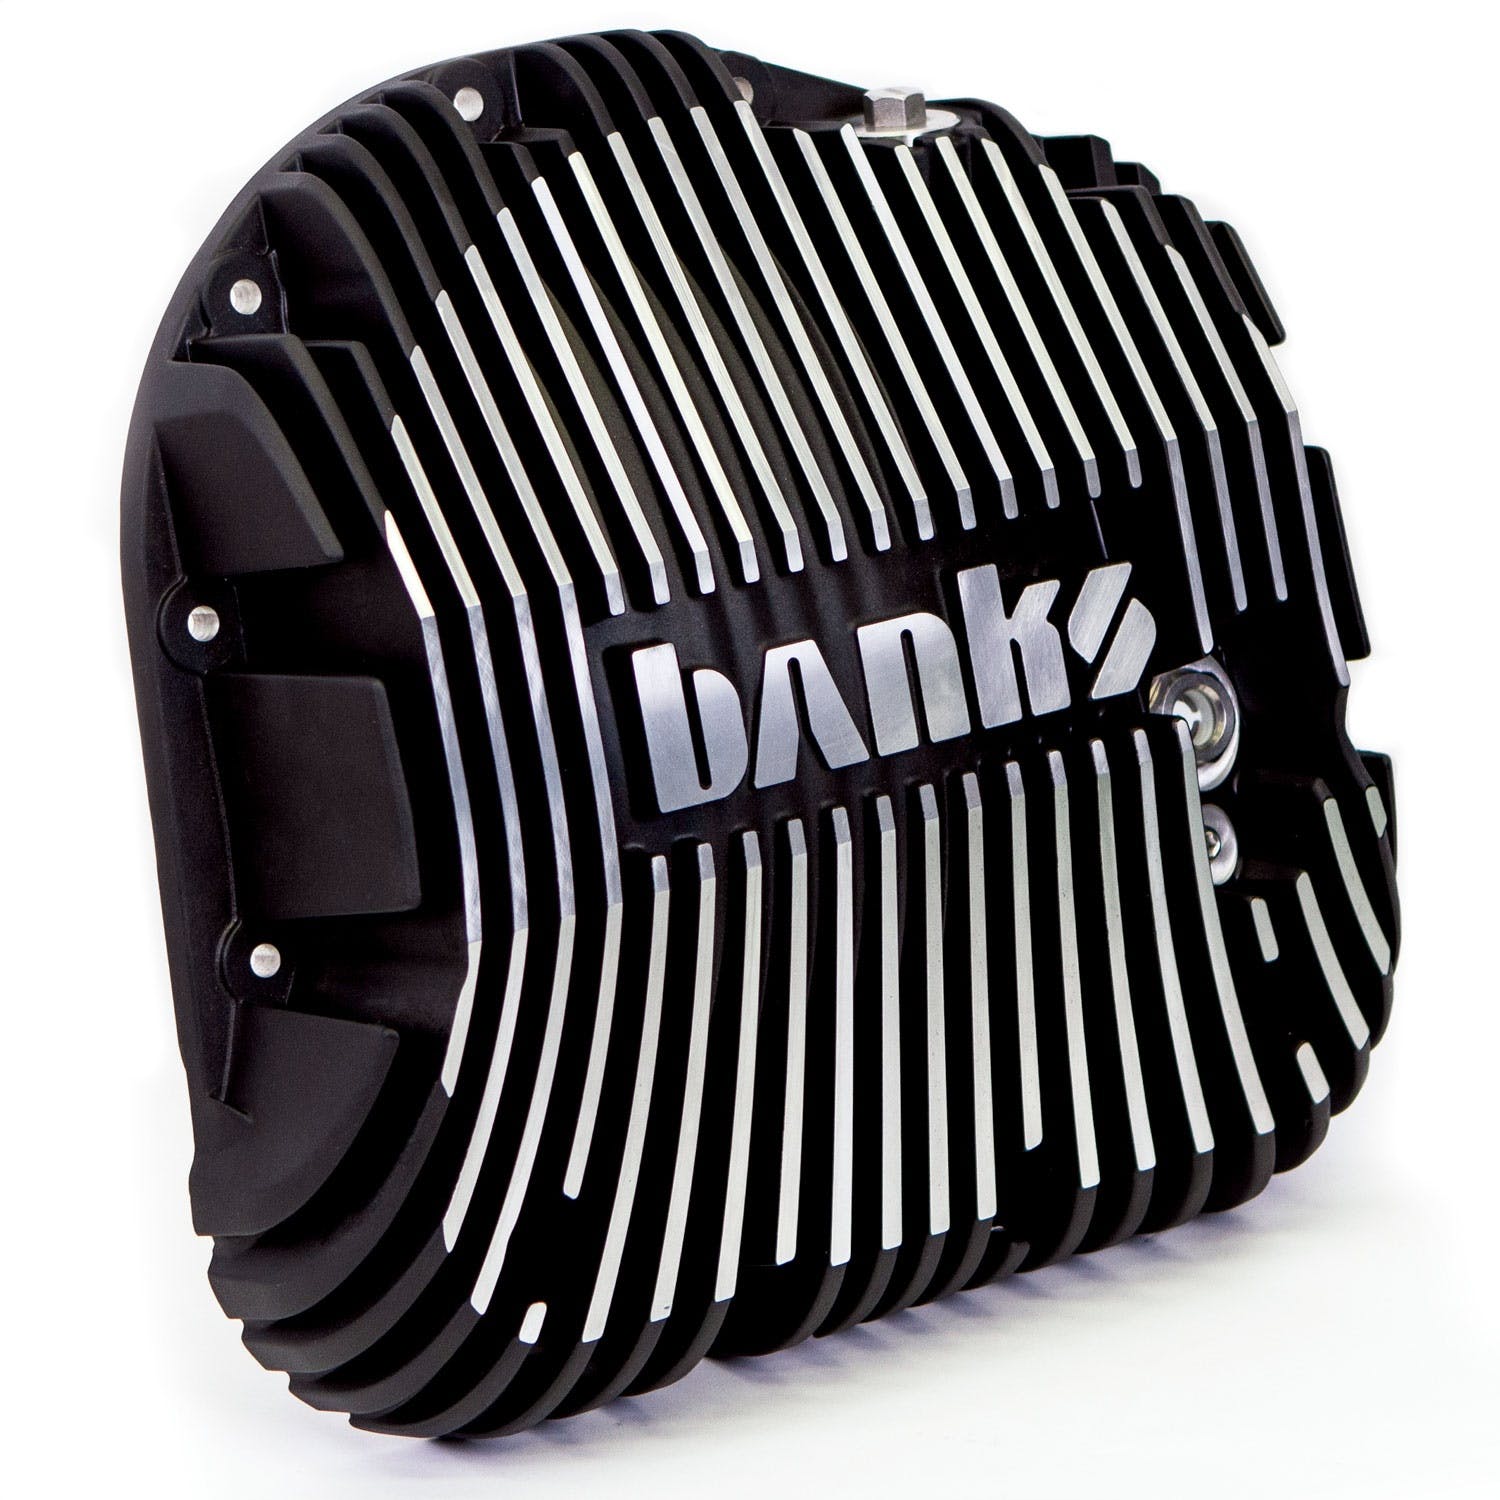 Banks Power 19252 Ram-Air® Differential Cover Kit